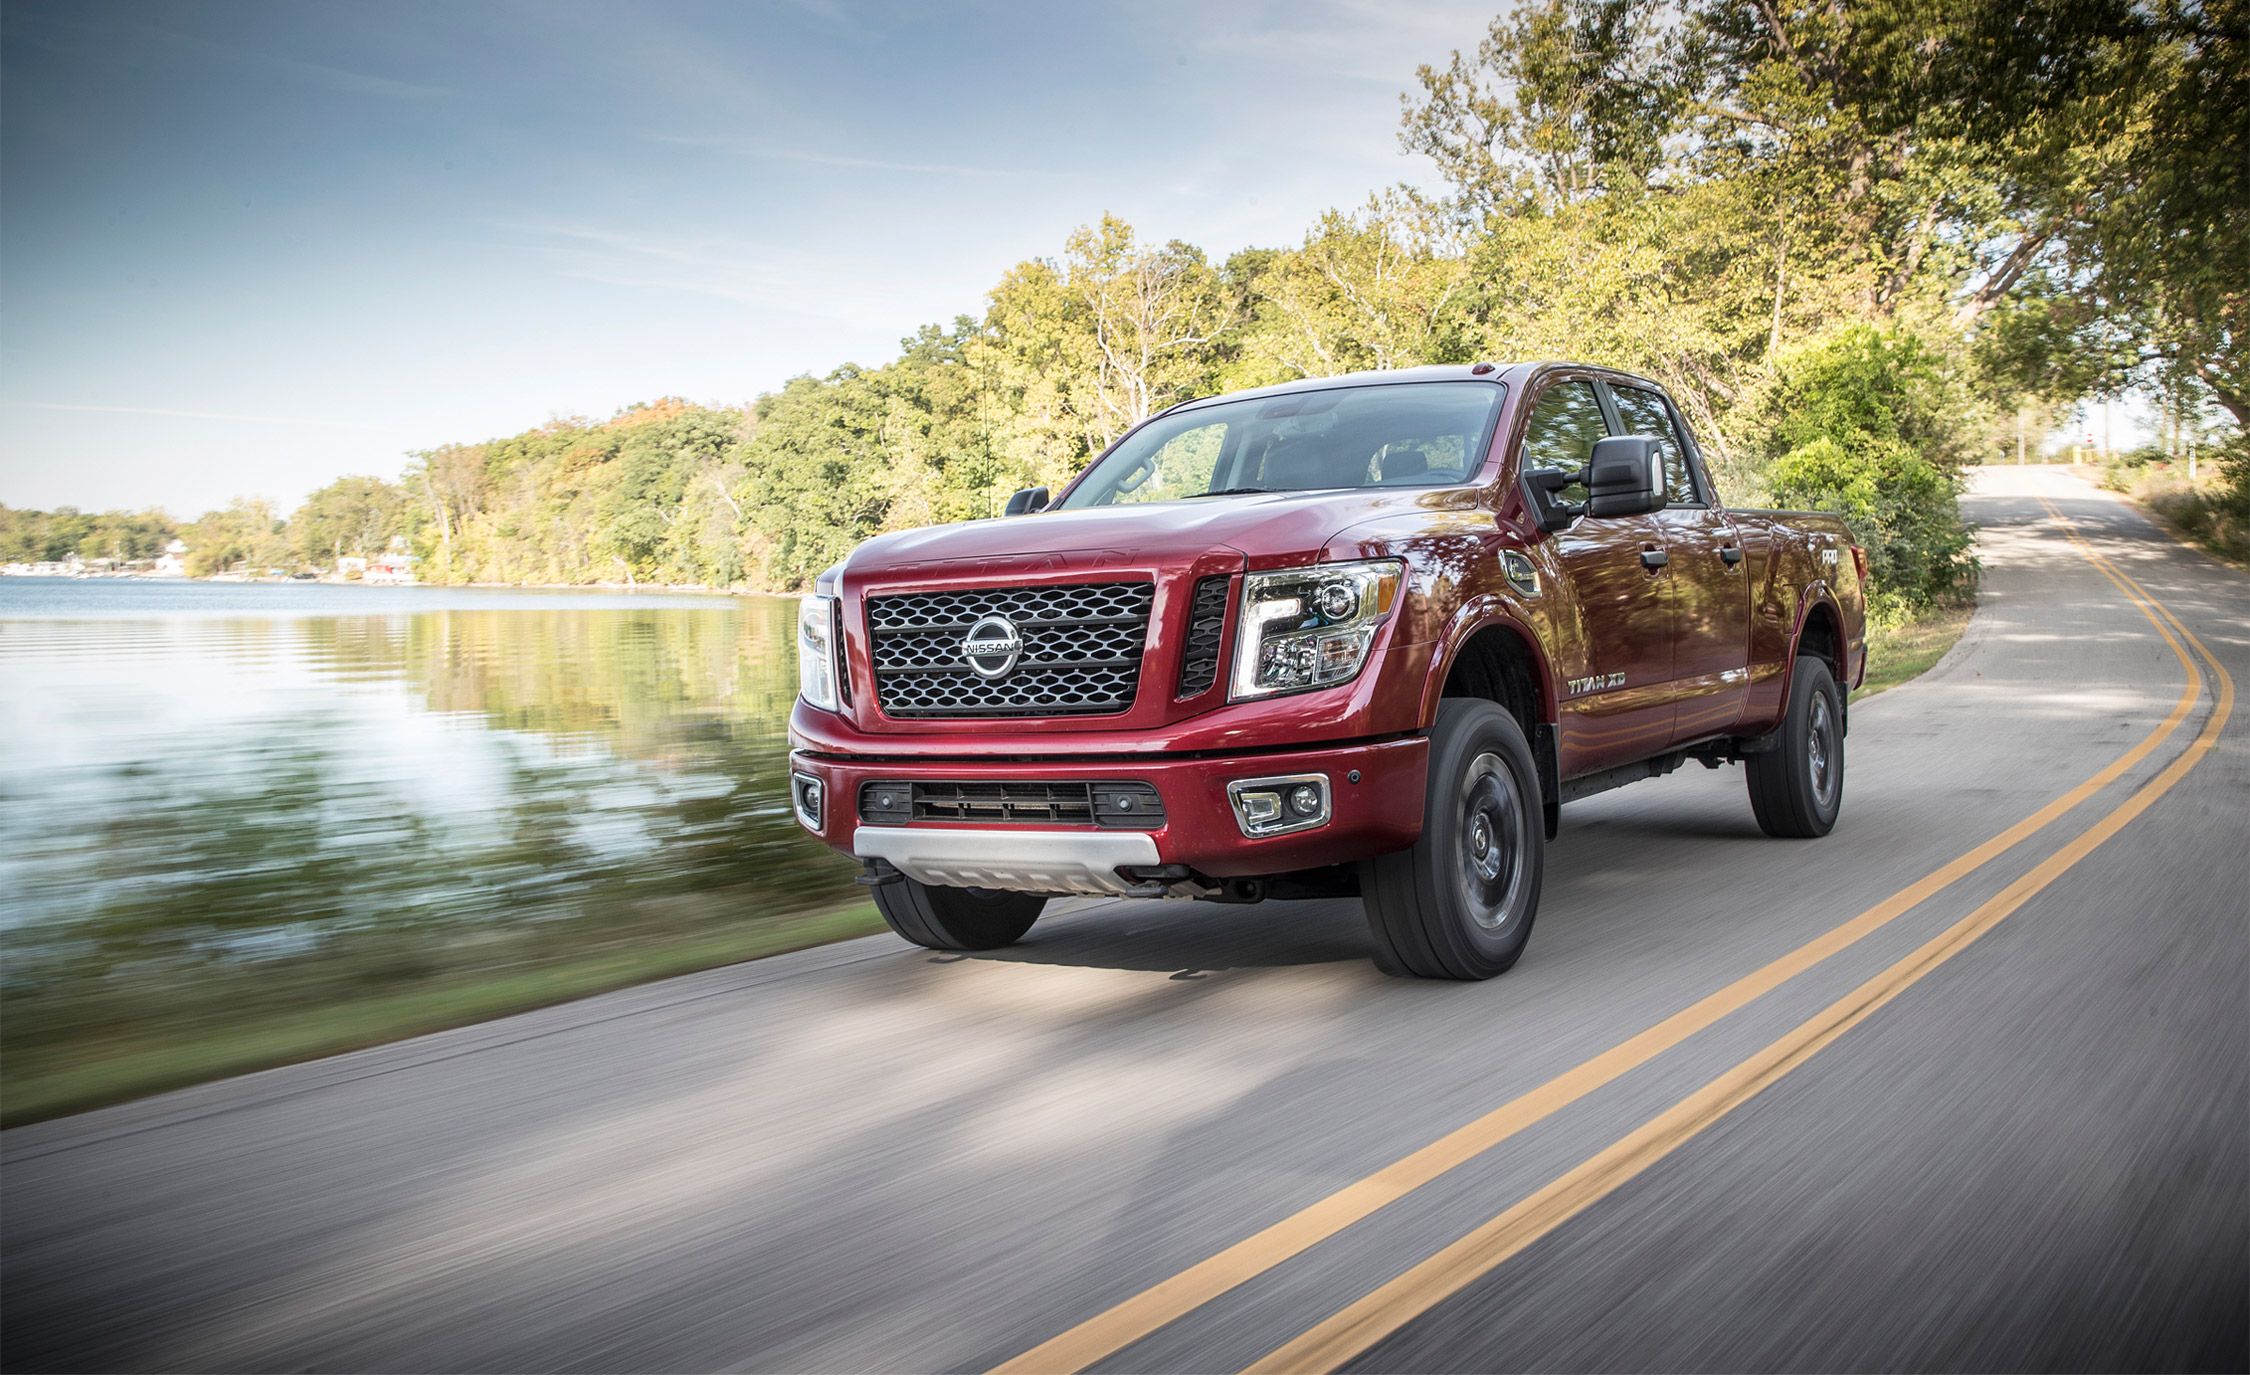 2019 Nissan Titan XD Review, Pricing, and Specs